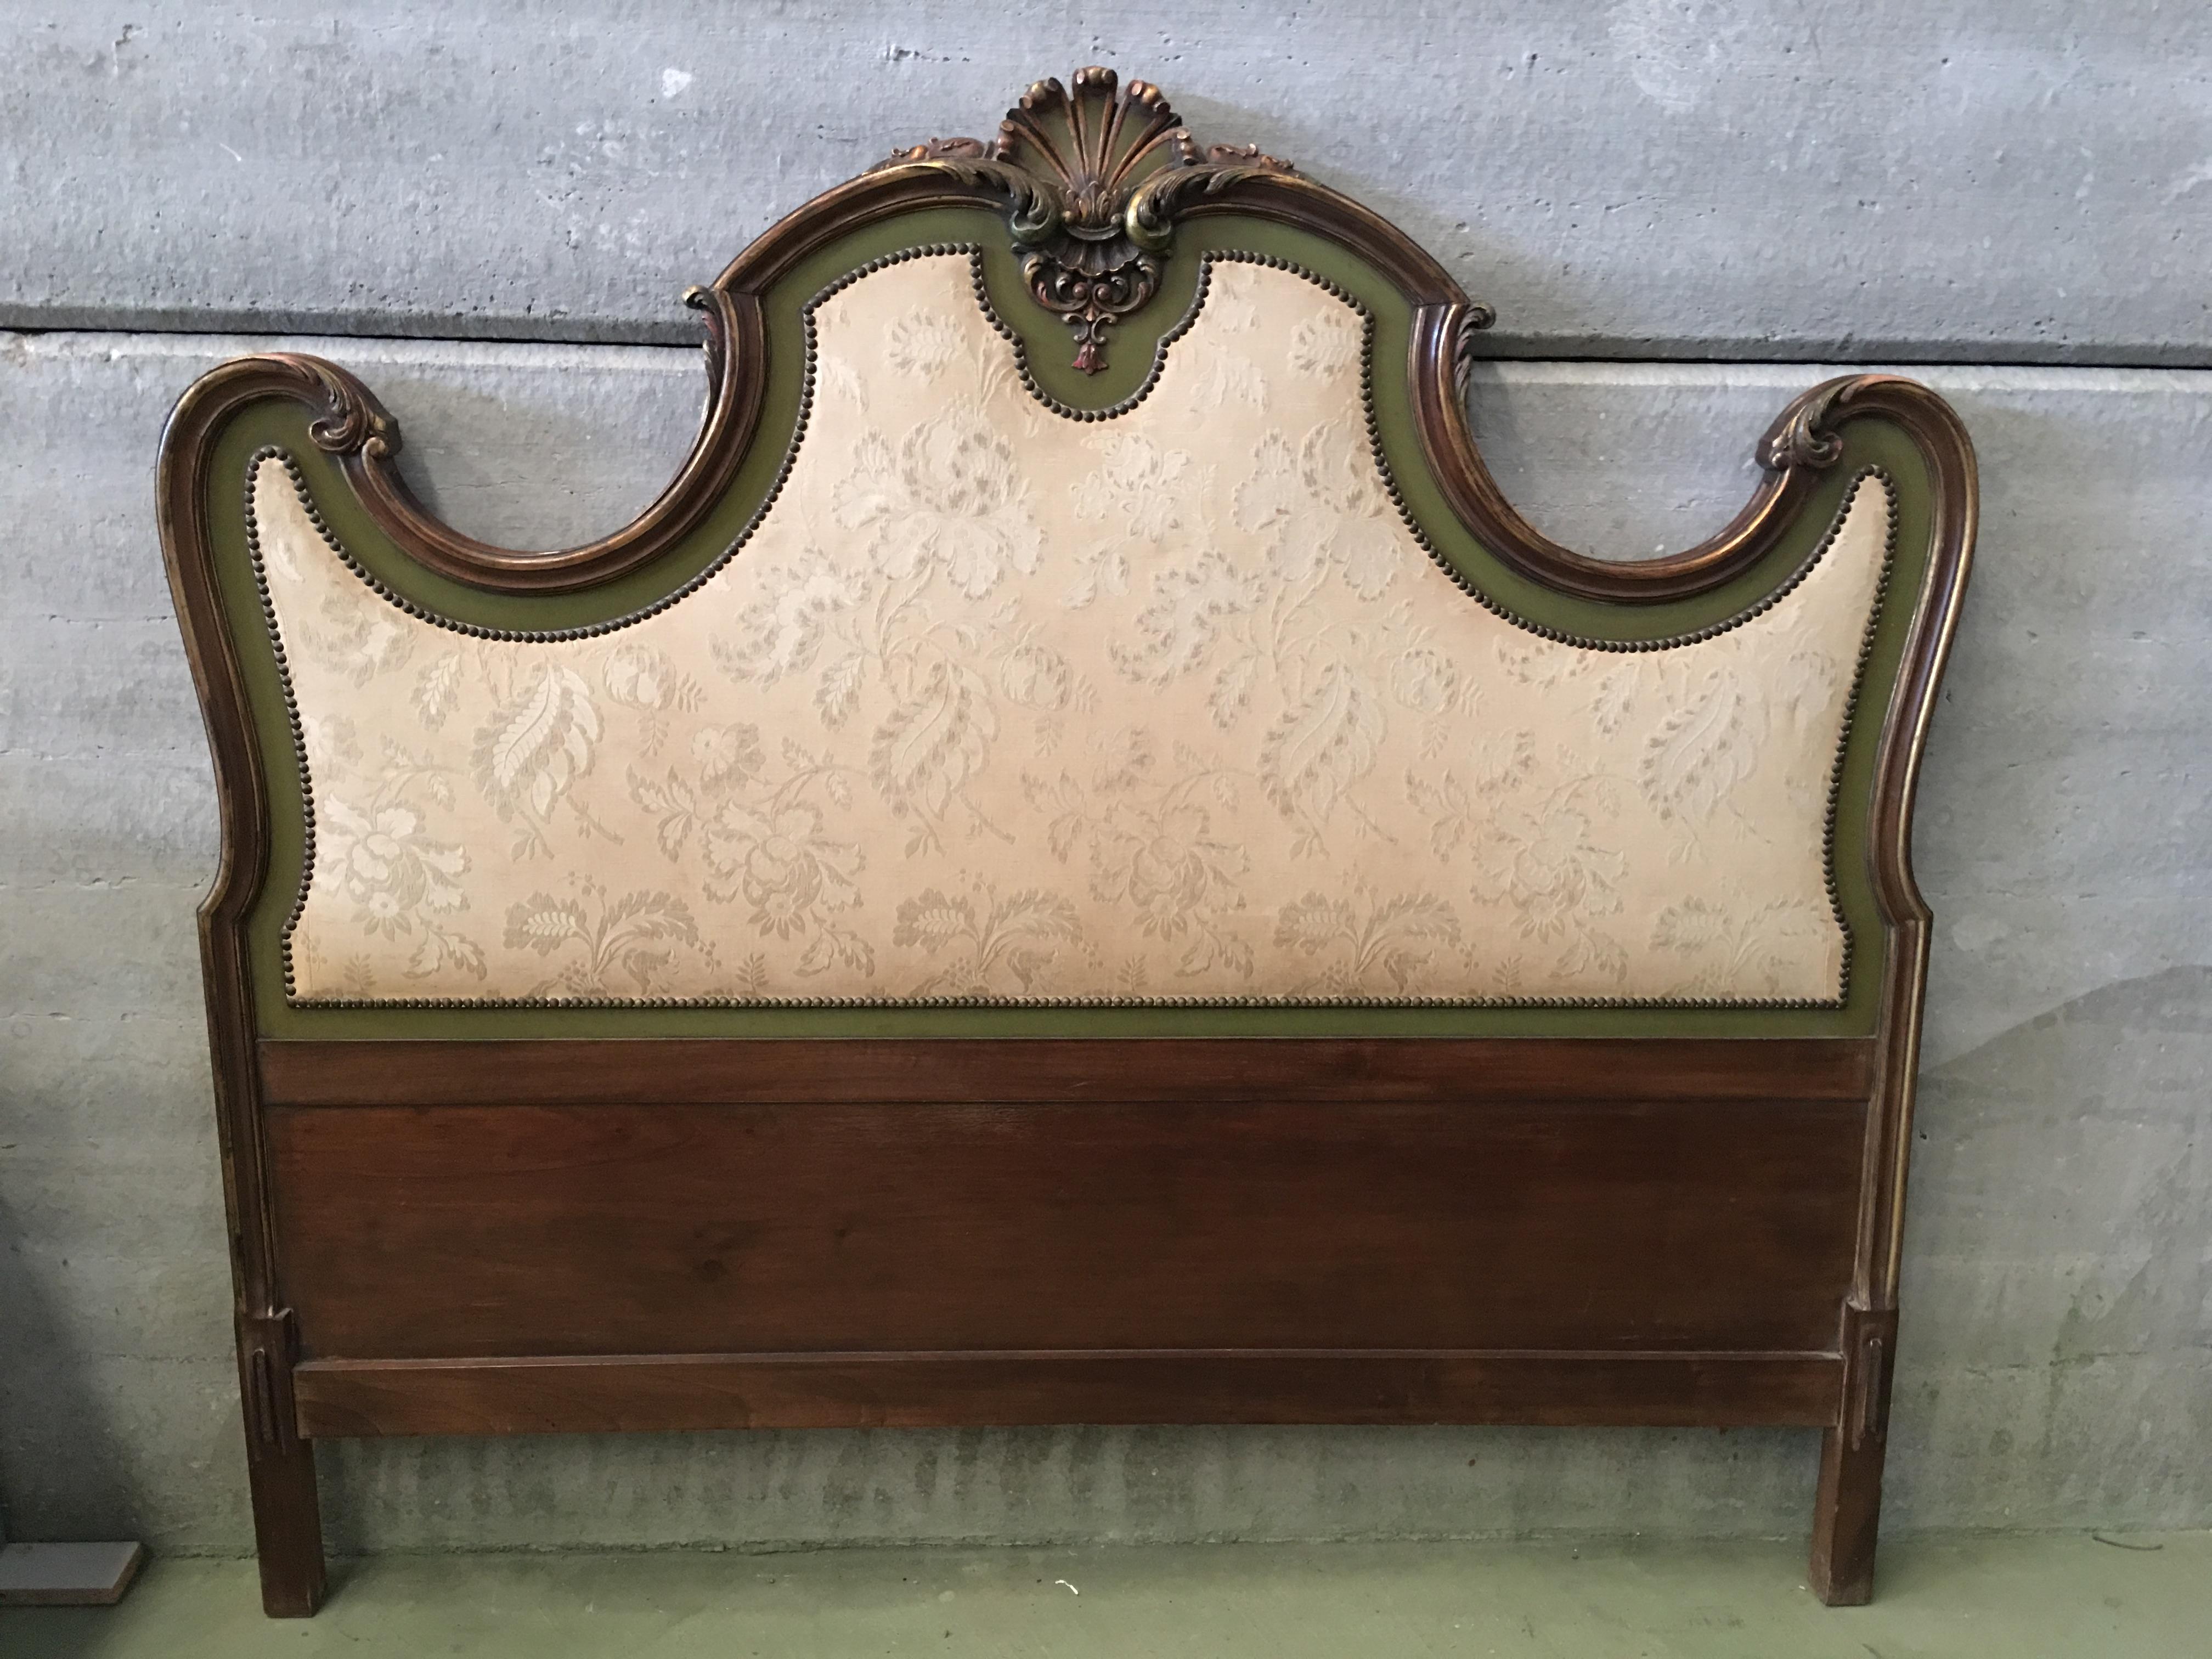 20th century Italian Baroque style carved wood with fabric headboard
Original patinated.